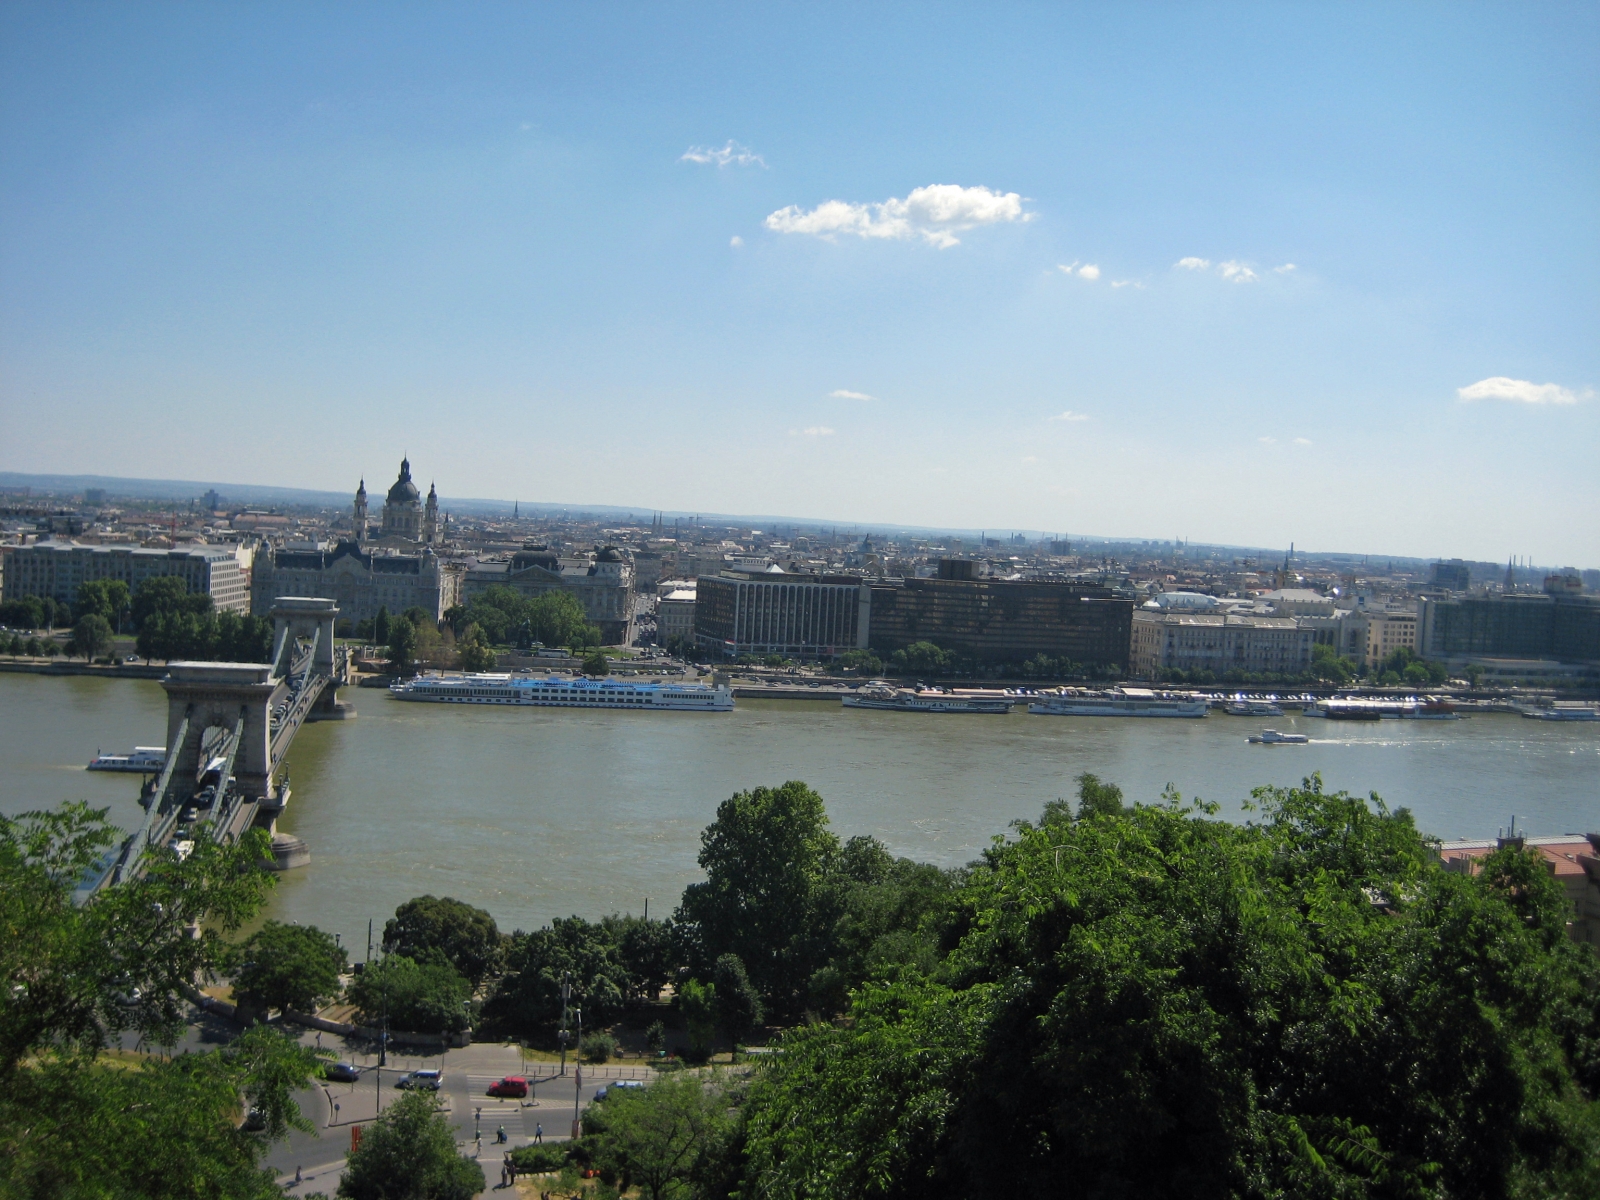 Pest and Danube from Castle Hill, Budapest, Hungary